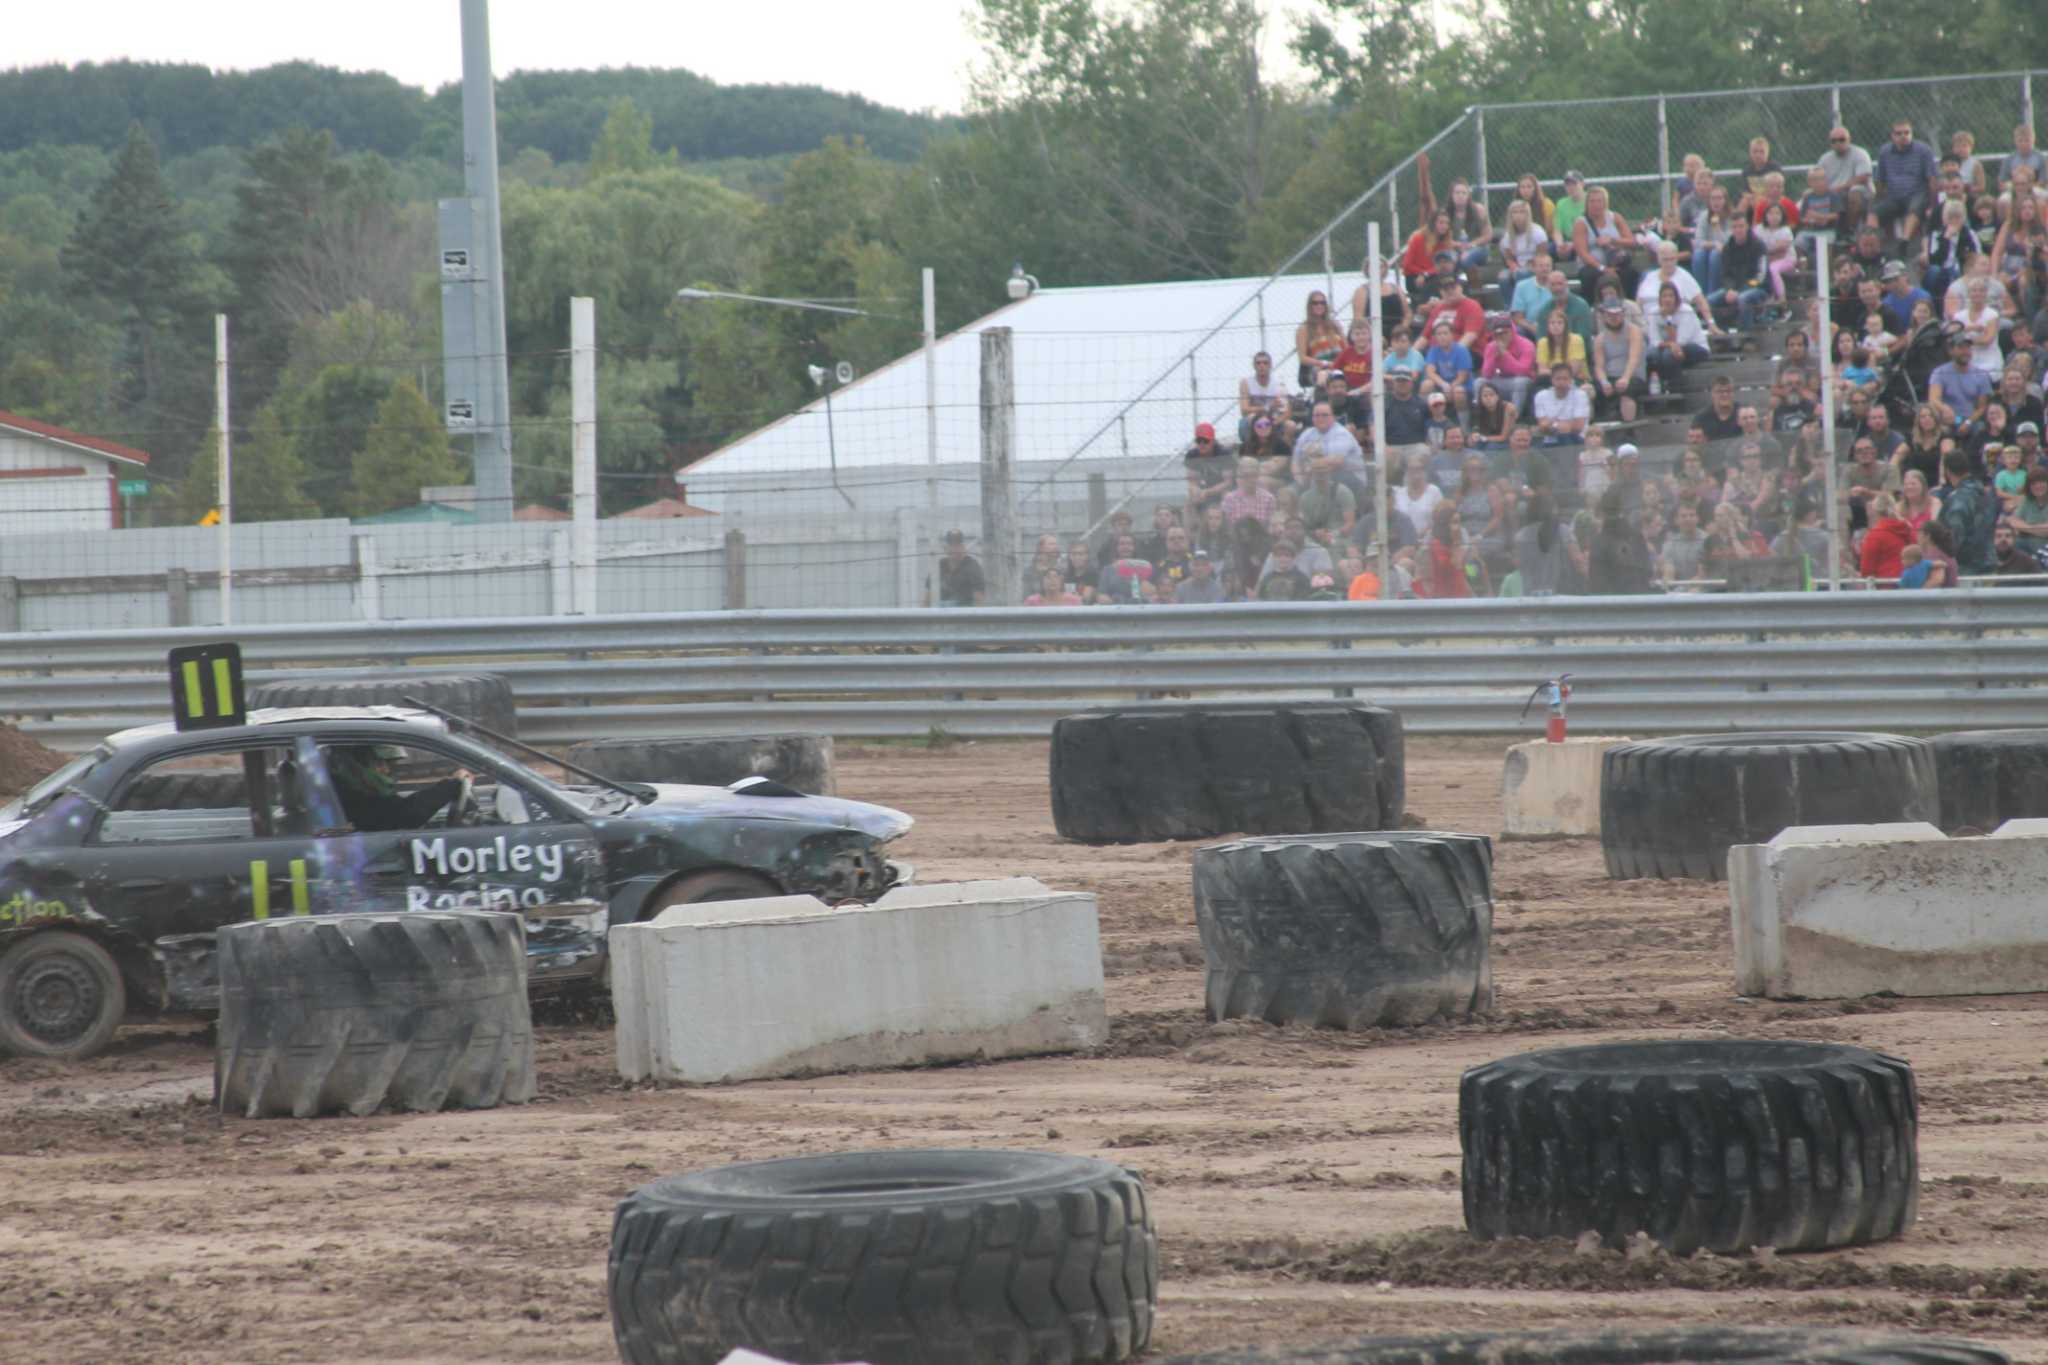 TNT Demolition Derby coming to Manistee County fairgrounds